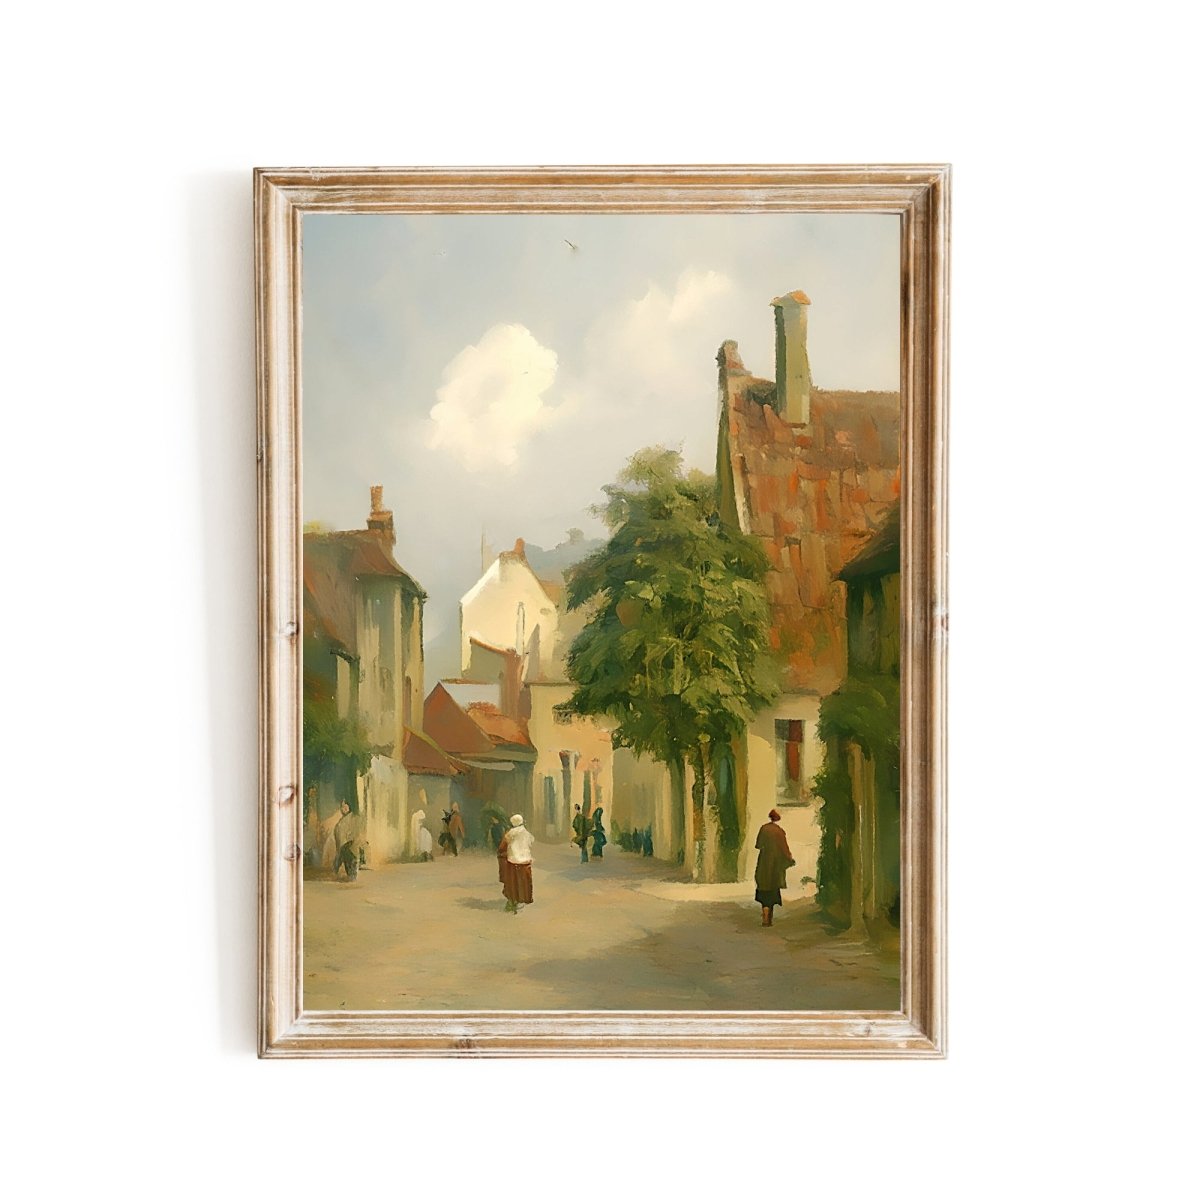 Vintage Town Life Old City Prints in Pastel Colors Impressionistic Art - Everything Pixel